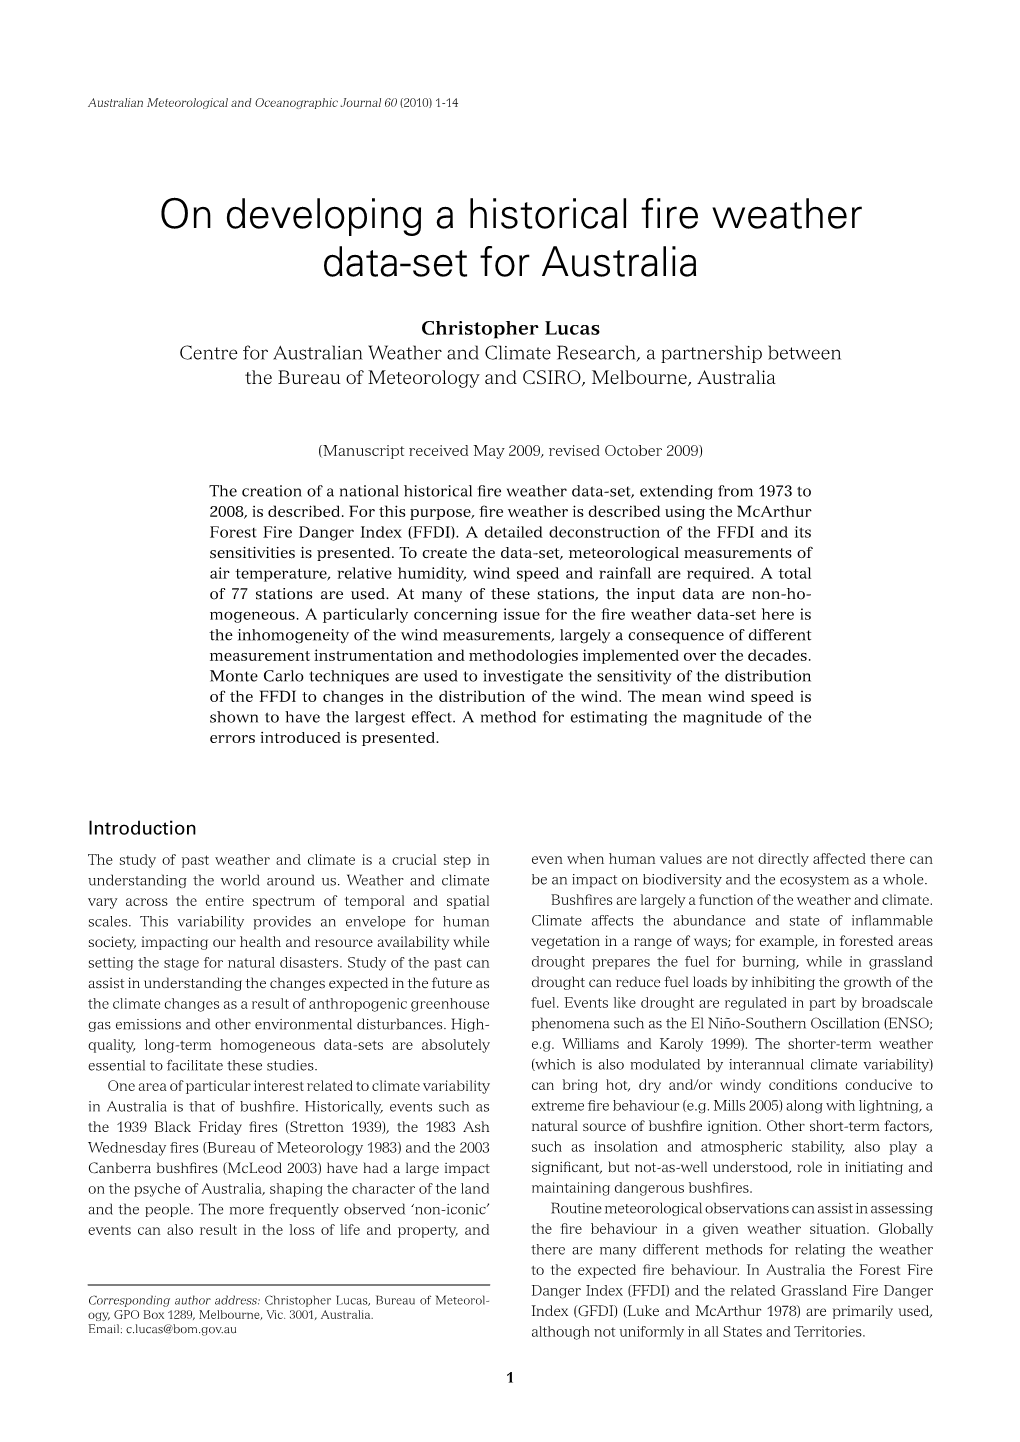 On Developing a Historical Fire Weather Data-Set for Australia